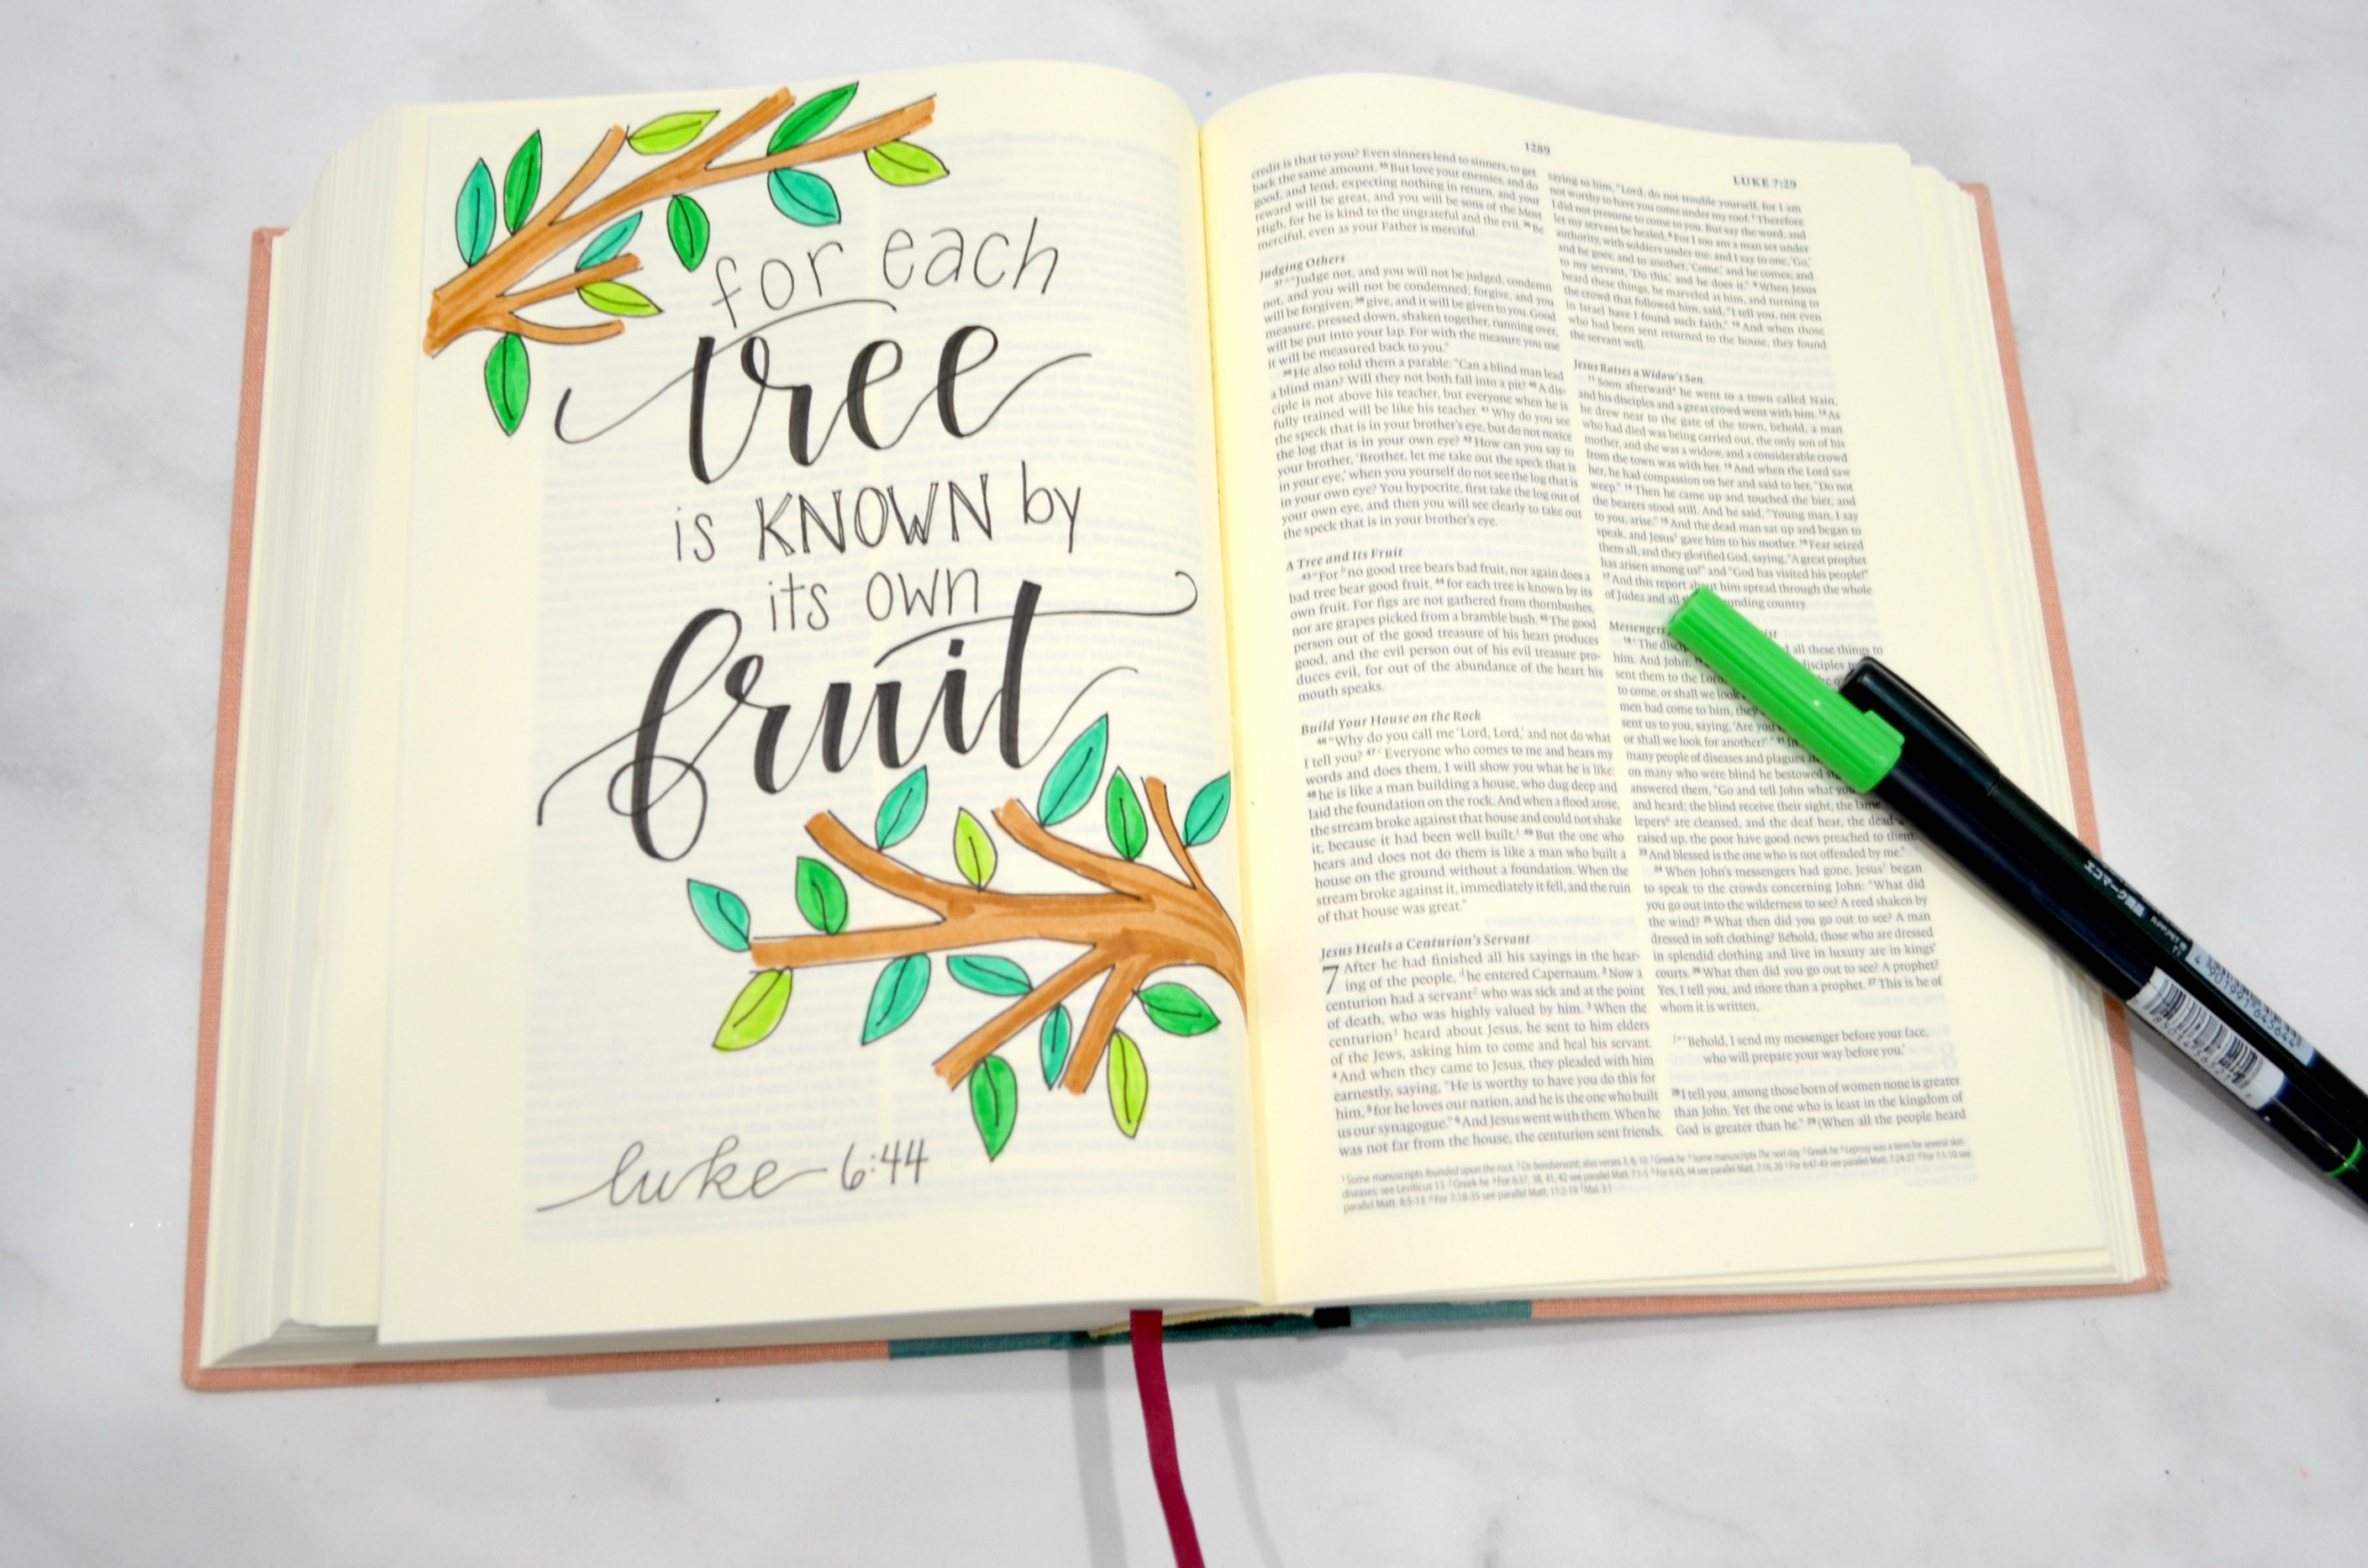 What Pen Did You Use? The Best Pens for Bible Journaling